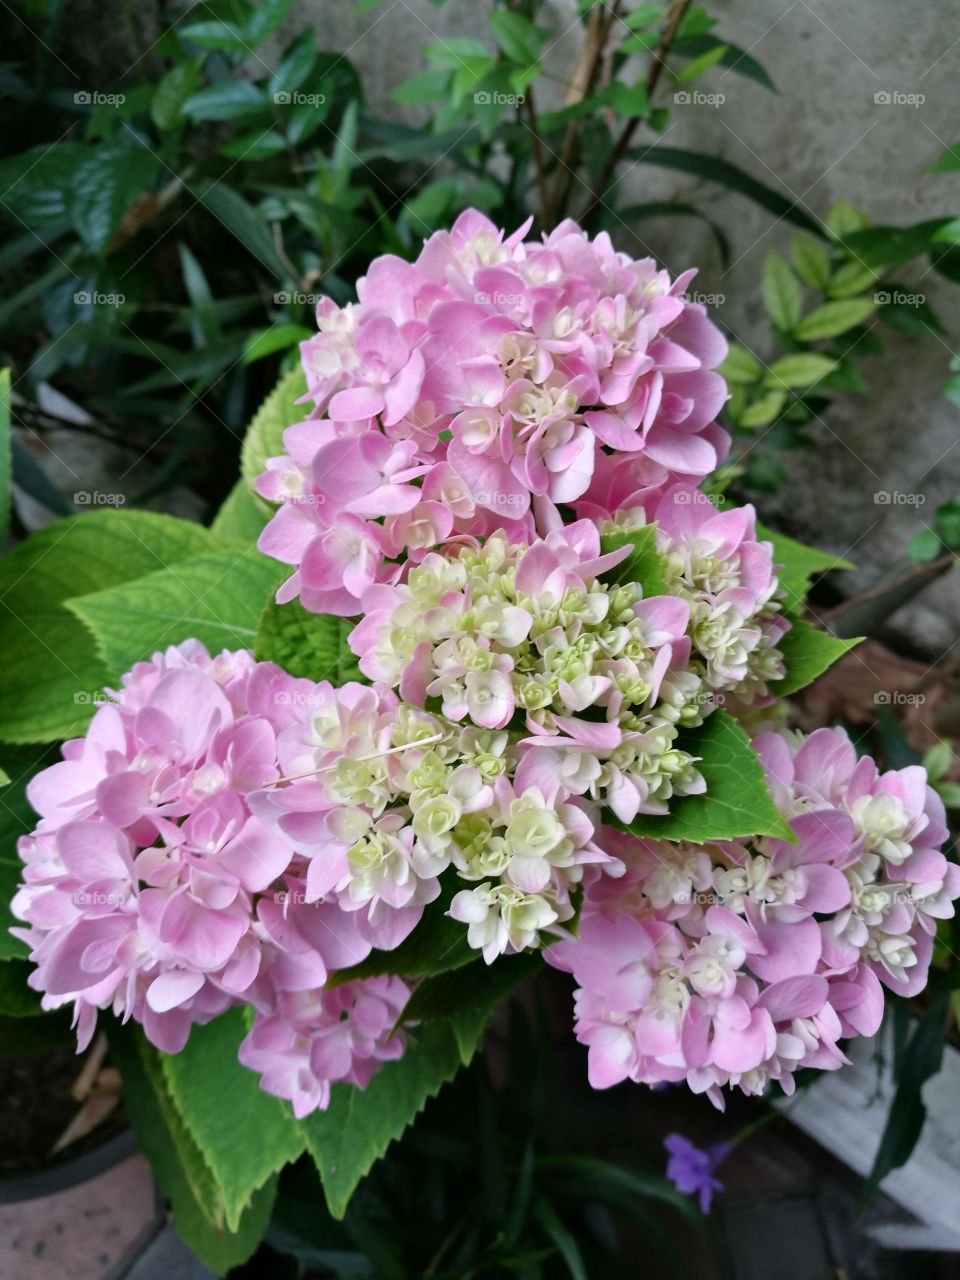 The blooming of hydrangea with beautiful pink flowers.